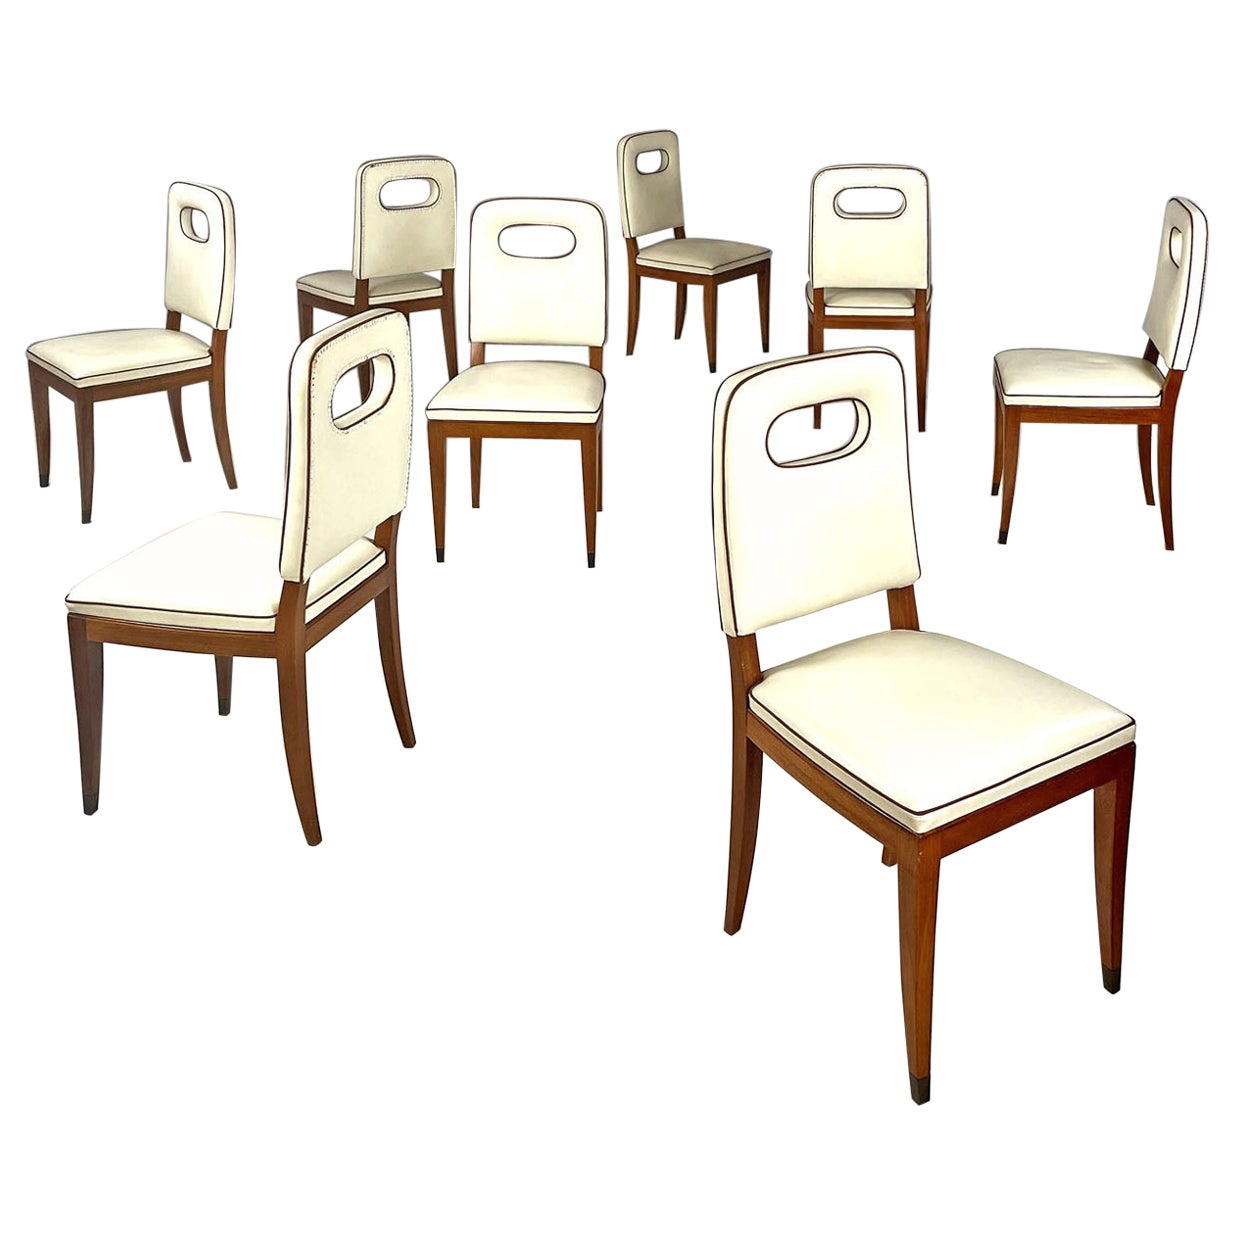 Italian Art Deco white leather and wood chairs by Giovanni Gariboldi, 1940s